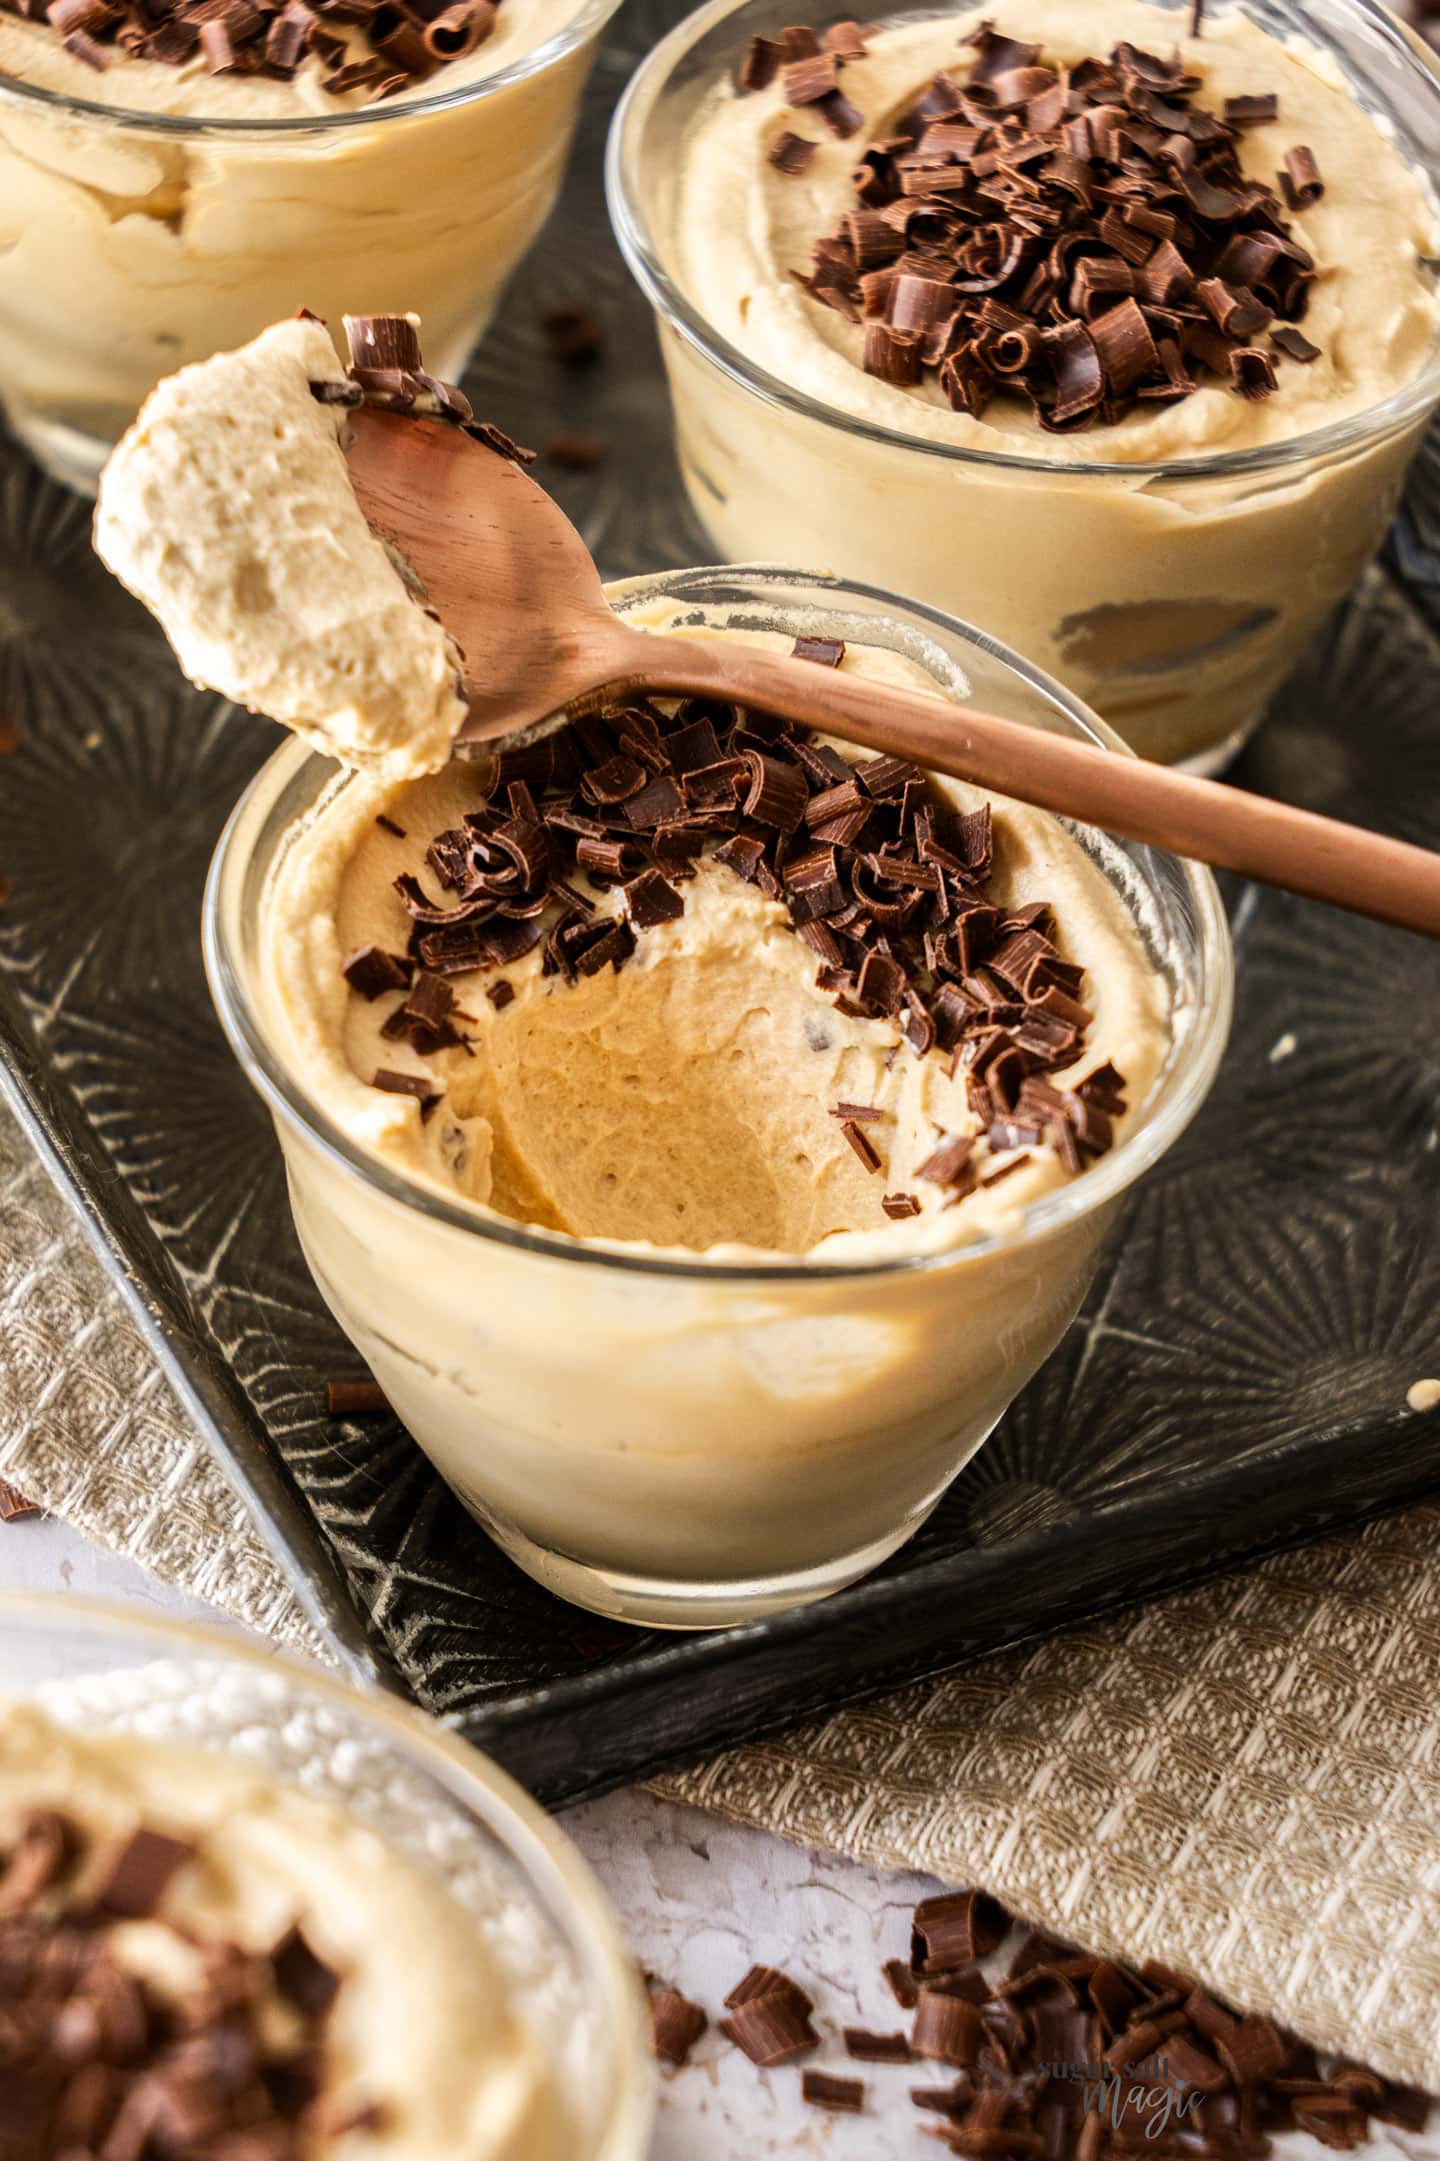 A coffee mousse with a spoonful taken from it.